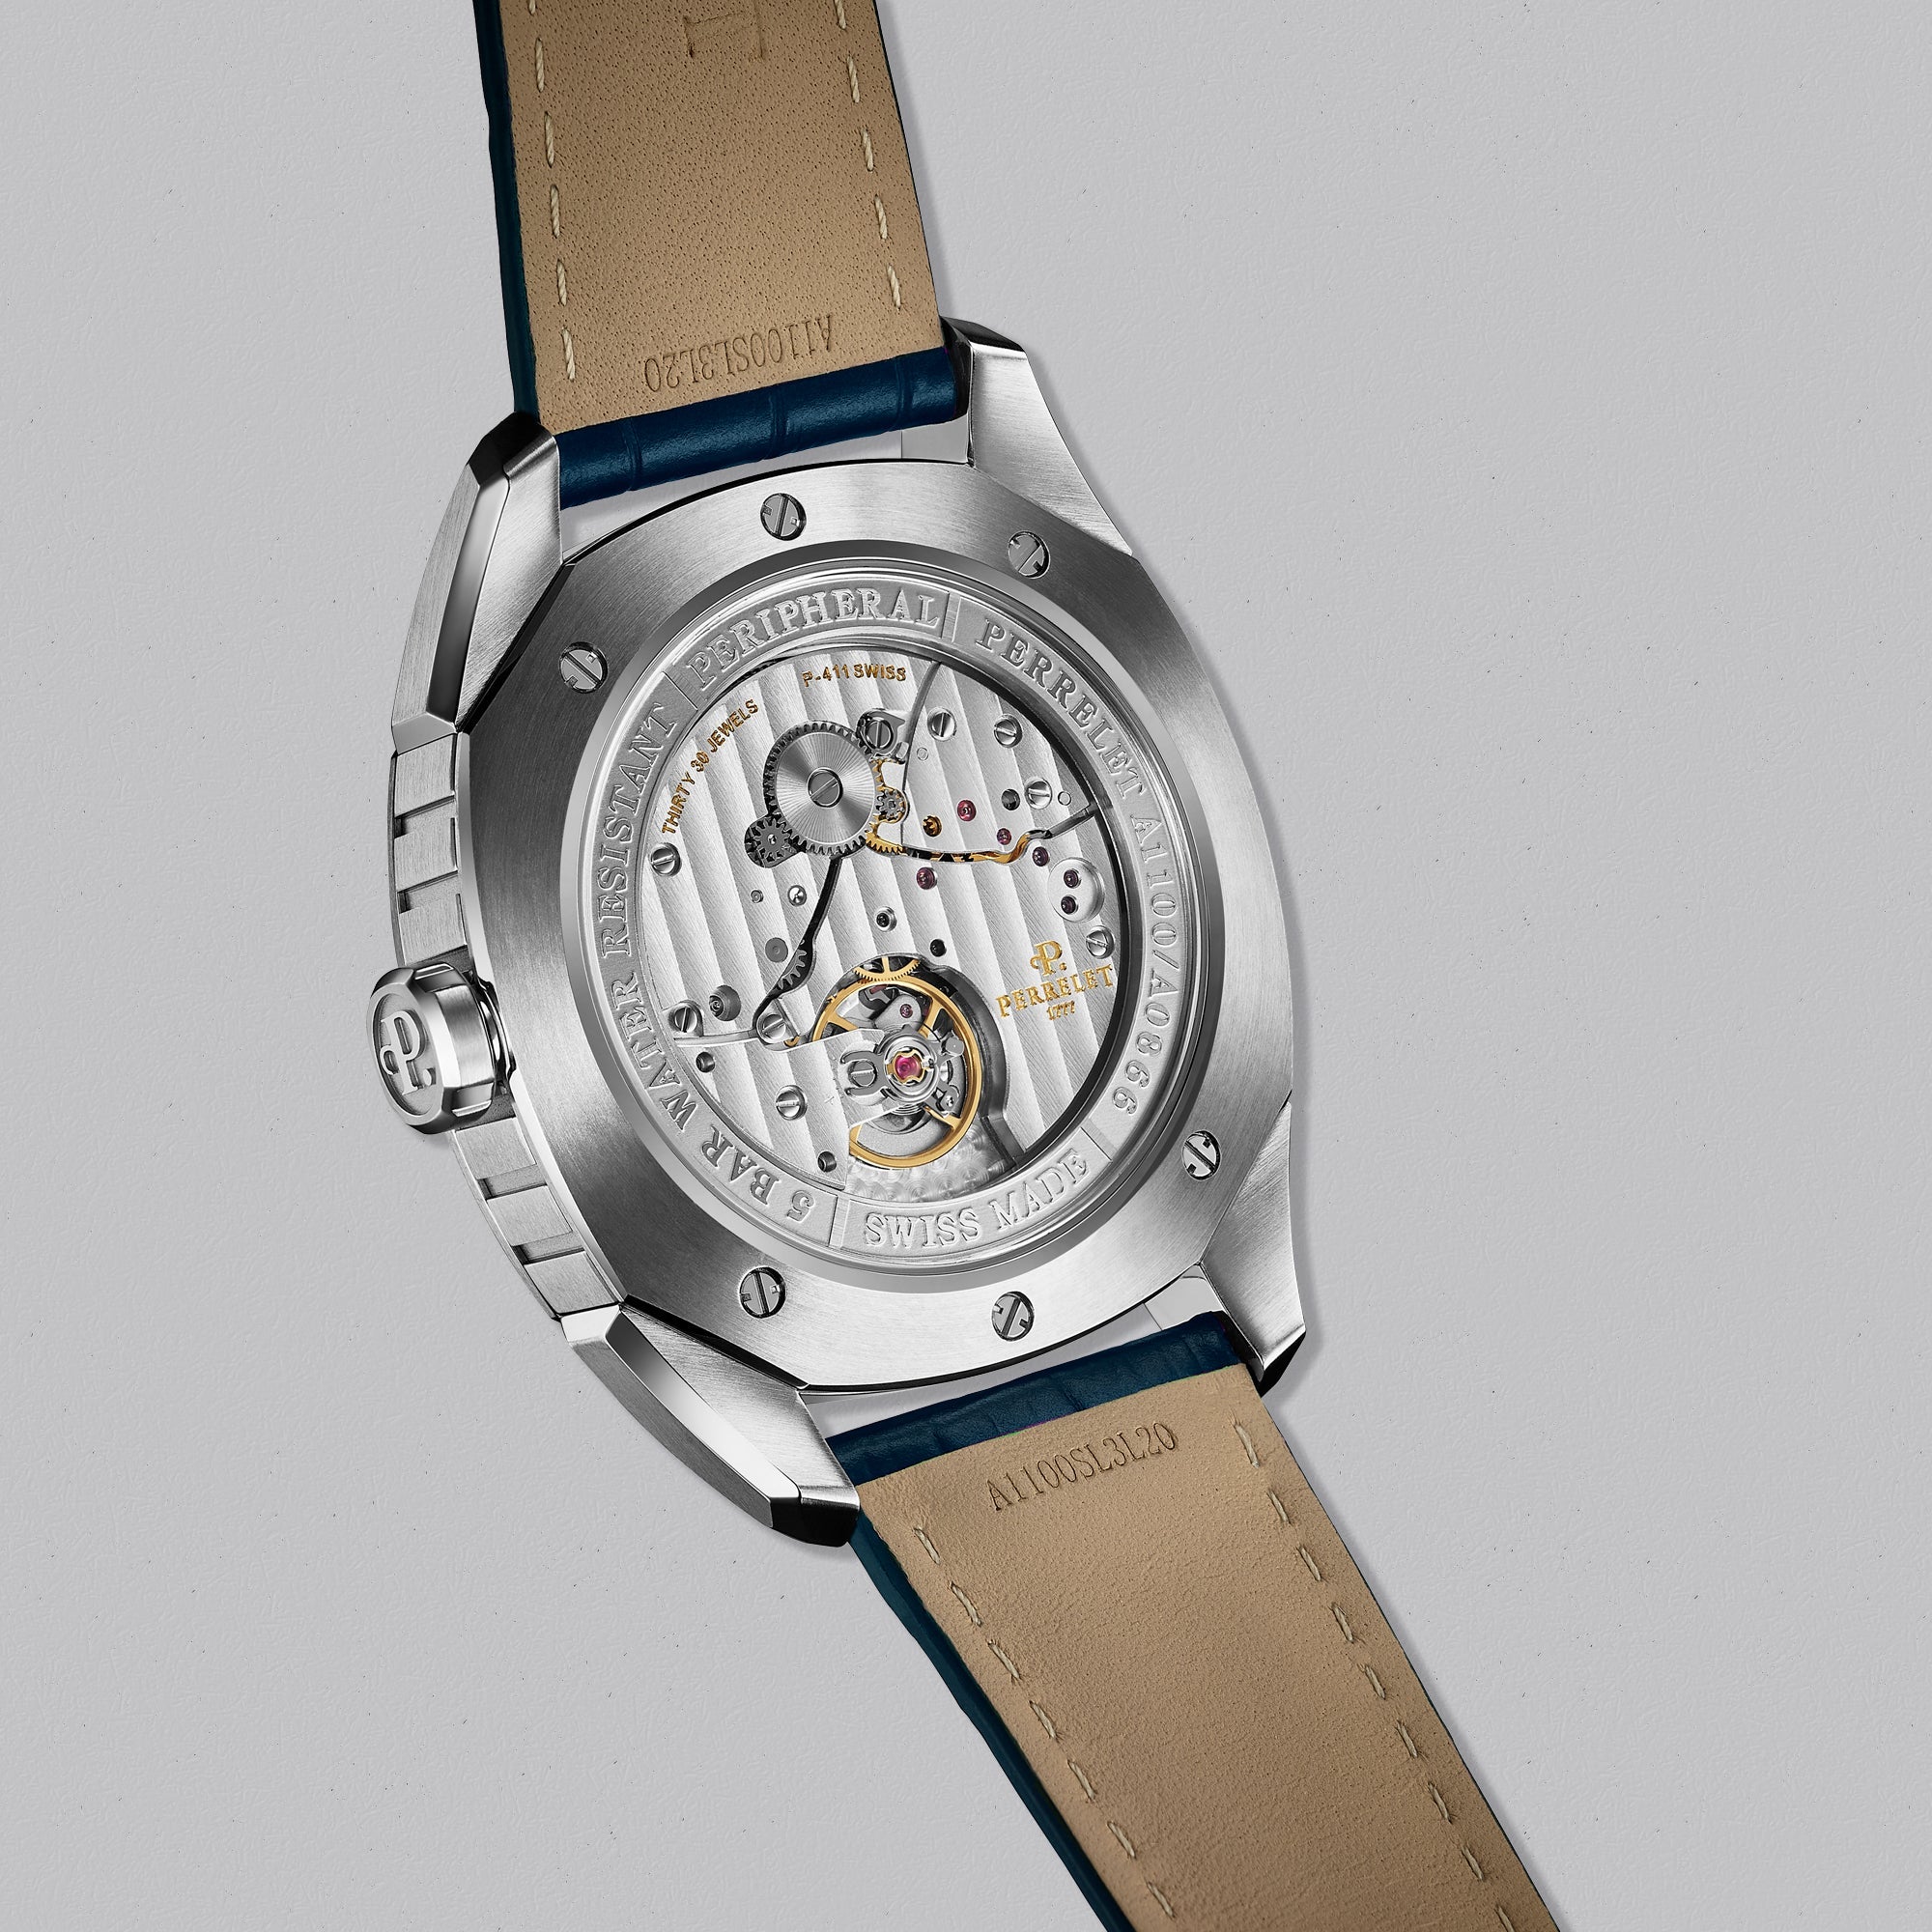 LAB PERIPHERAL 3H SS BLUE DIAL - Swiss Gallery Iraq PERRELET